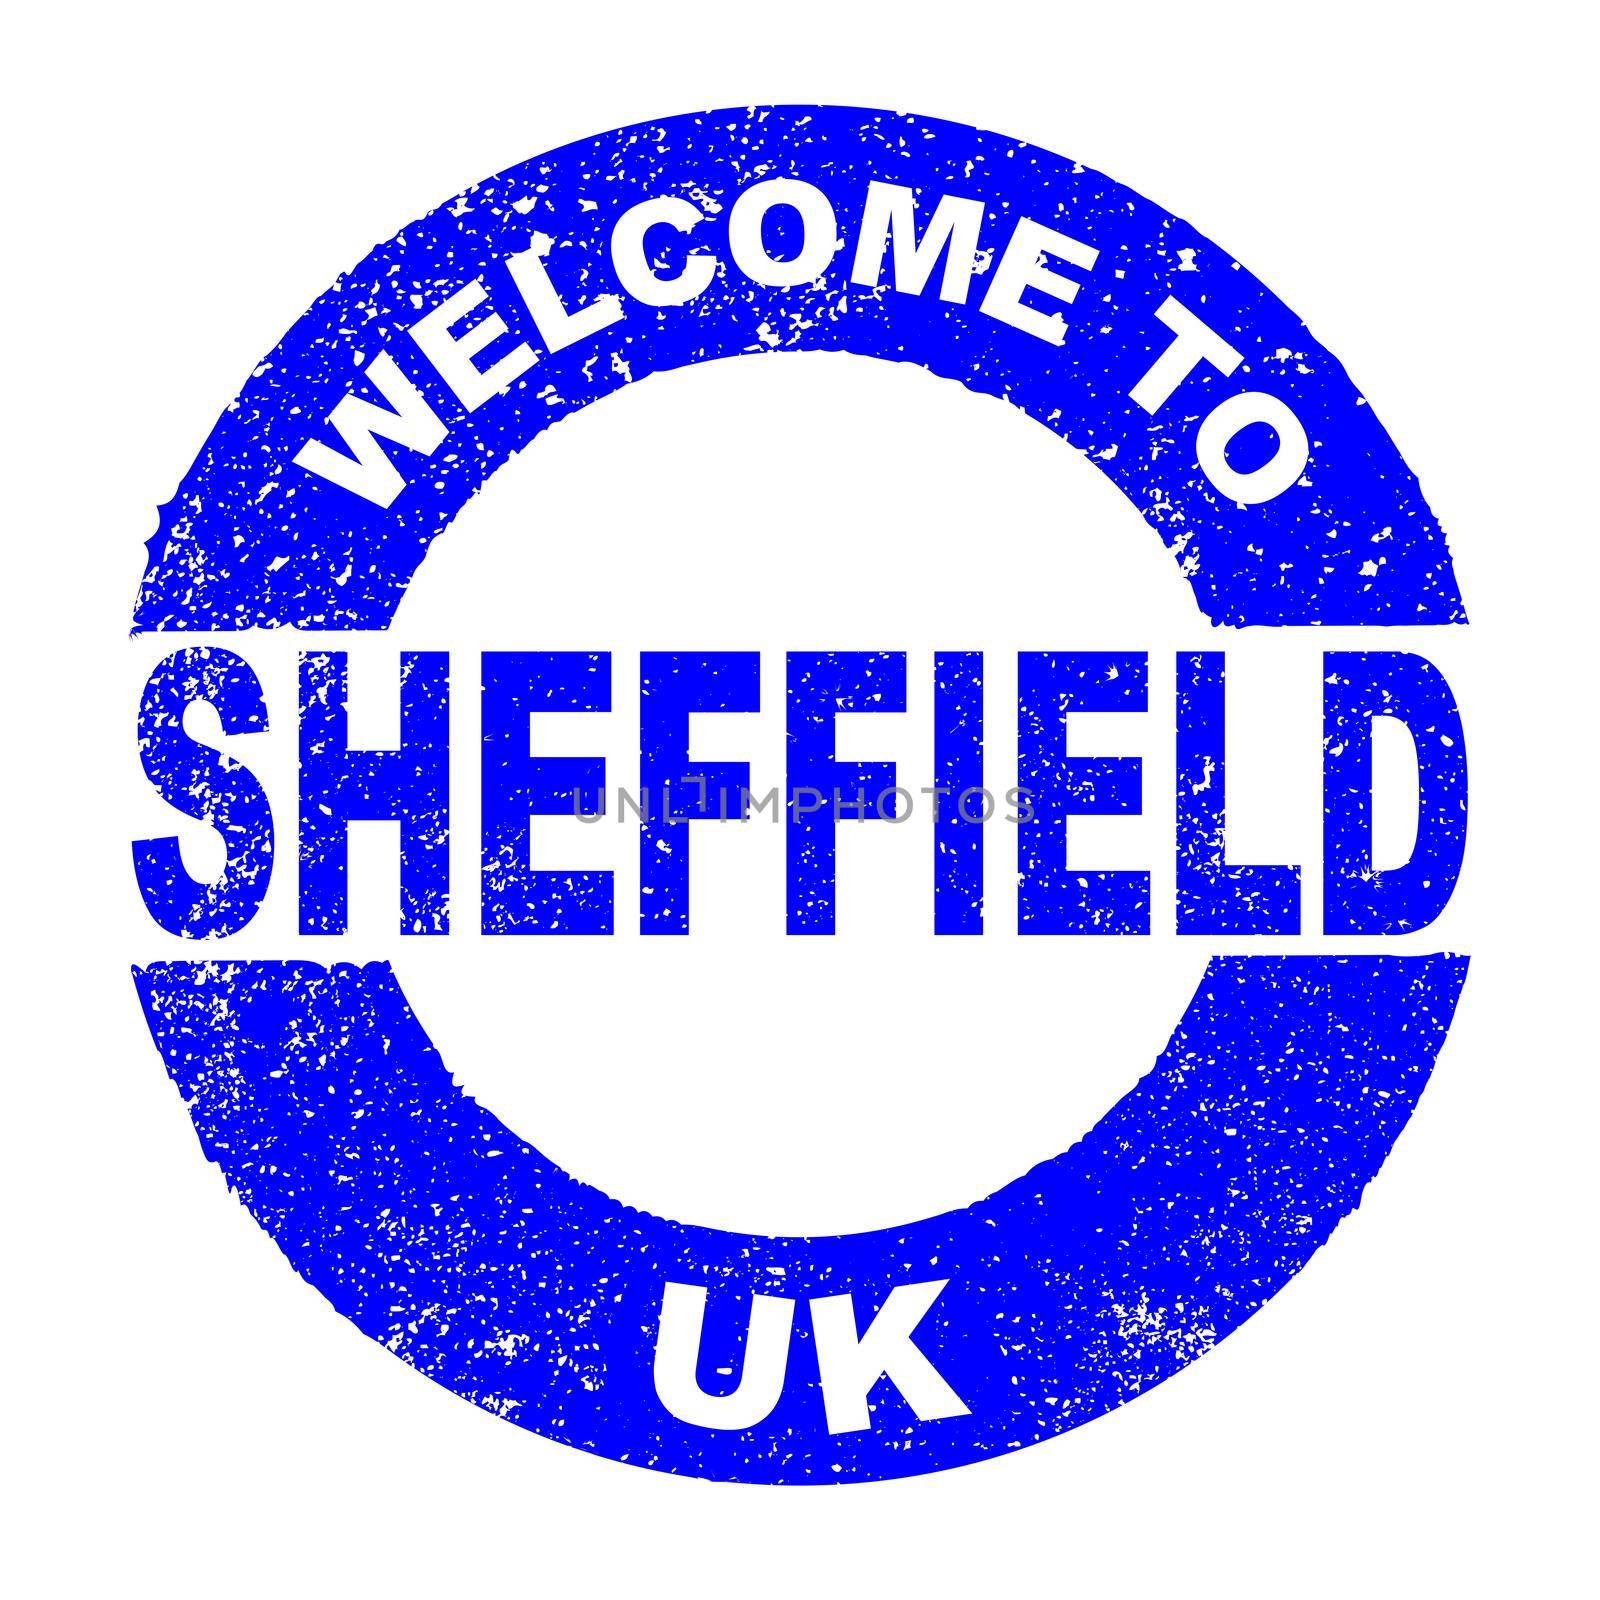 A grunge rubber ink stamp with the text Welcome To Sheffield UK over a white background